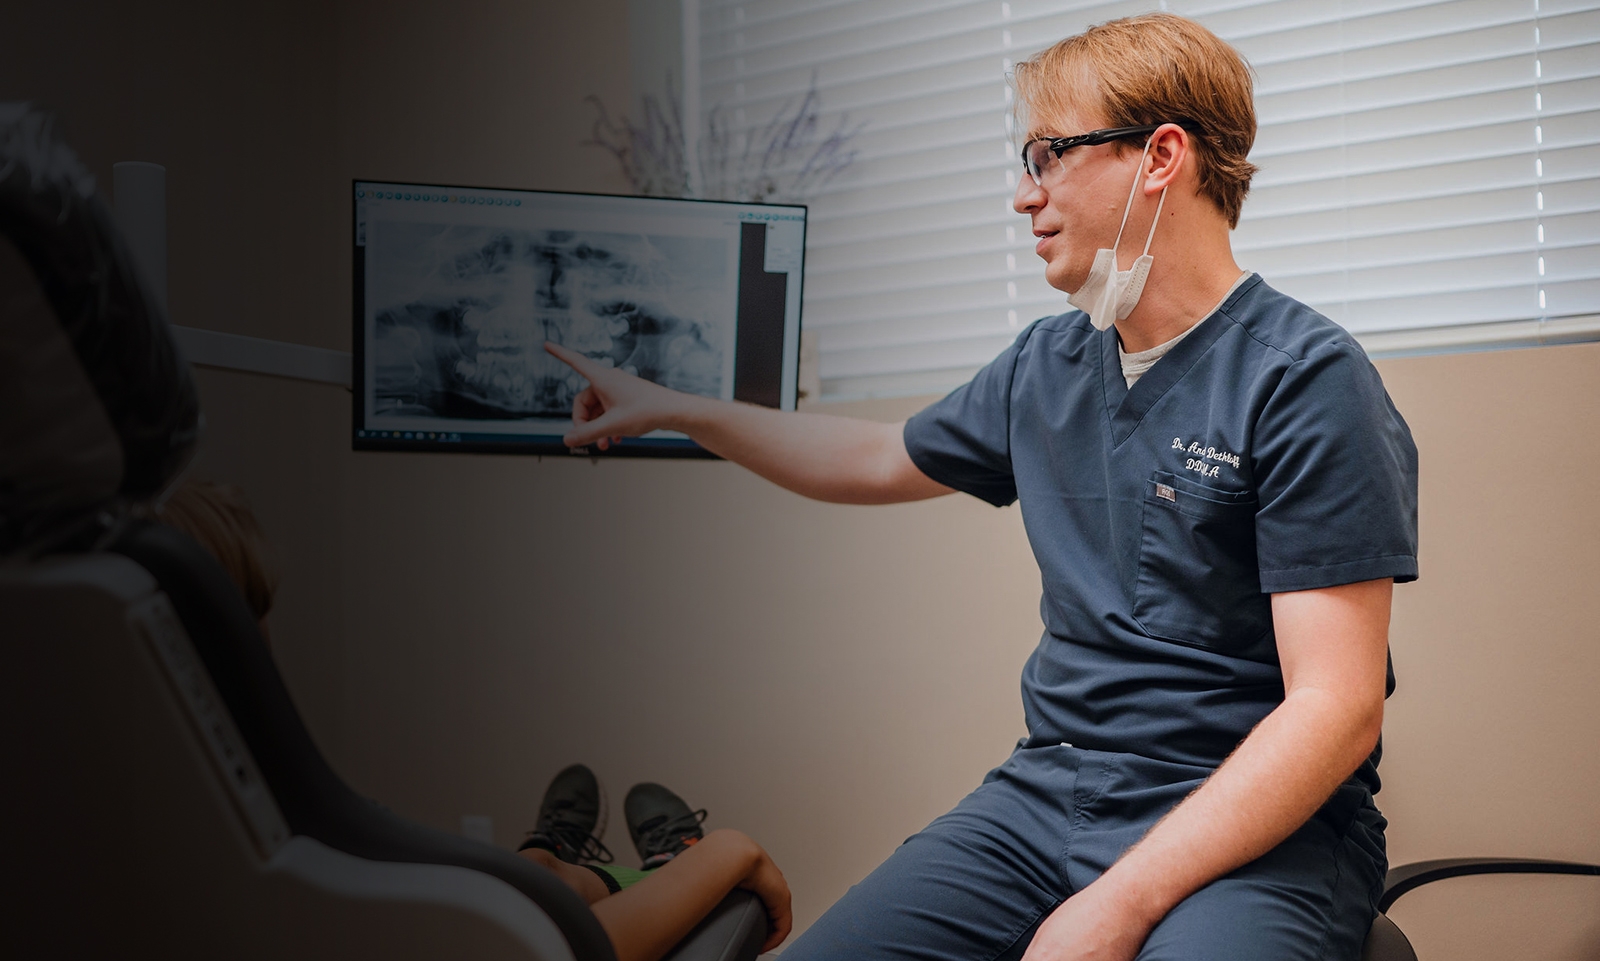 dentist showing patient a screen